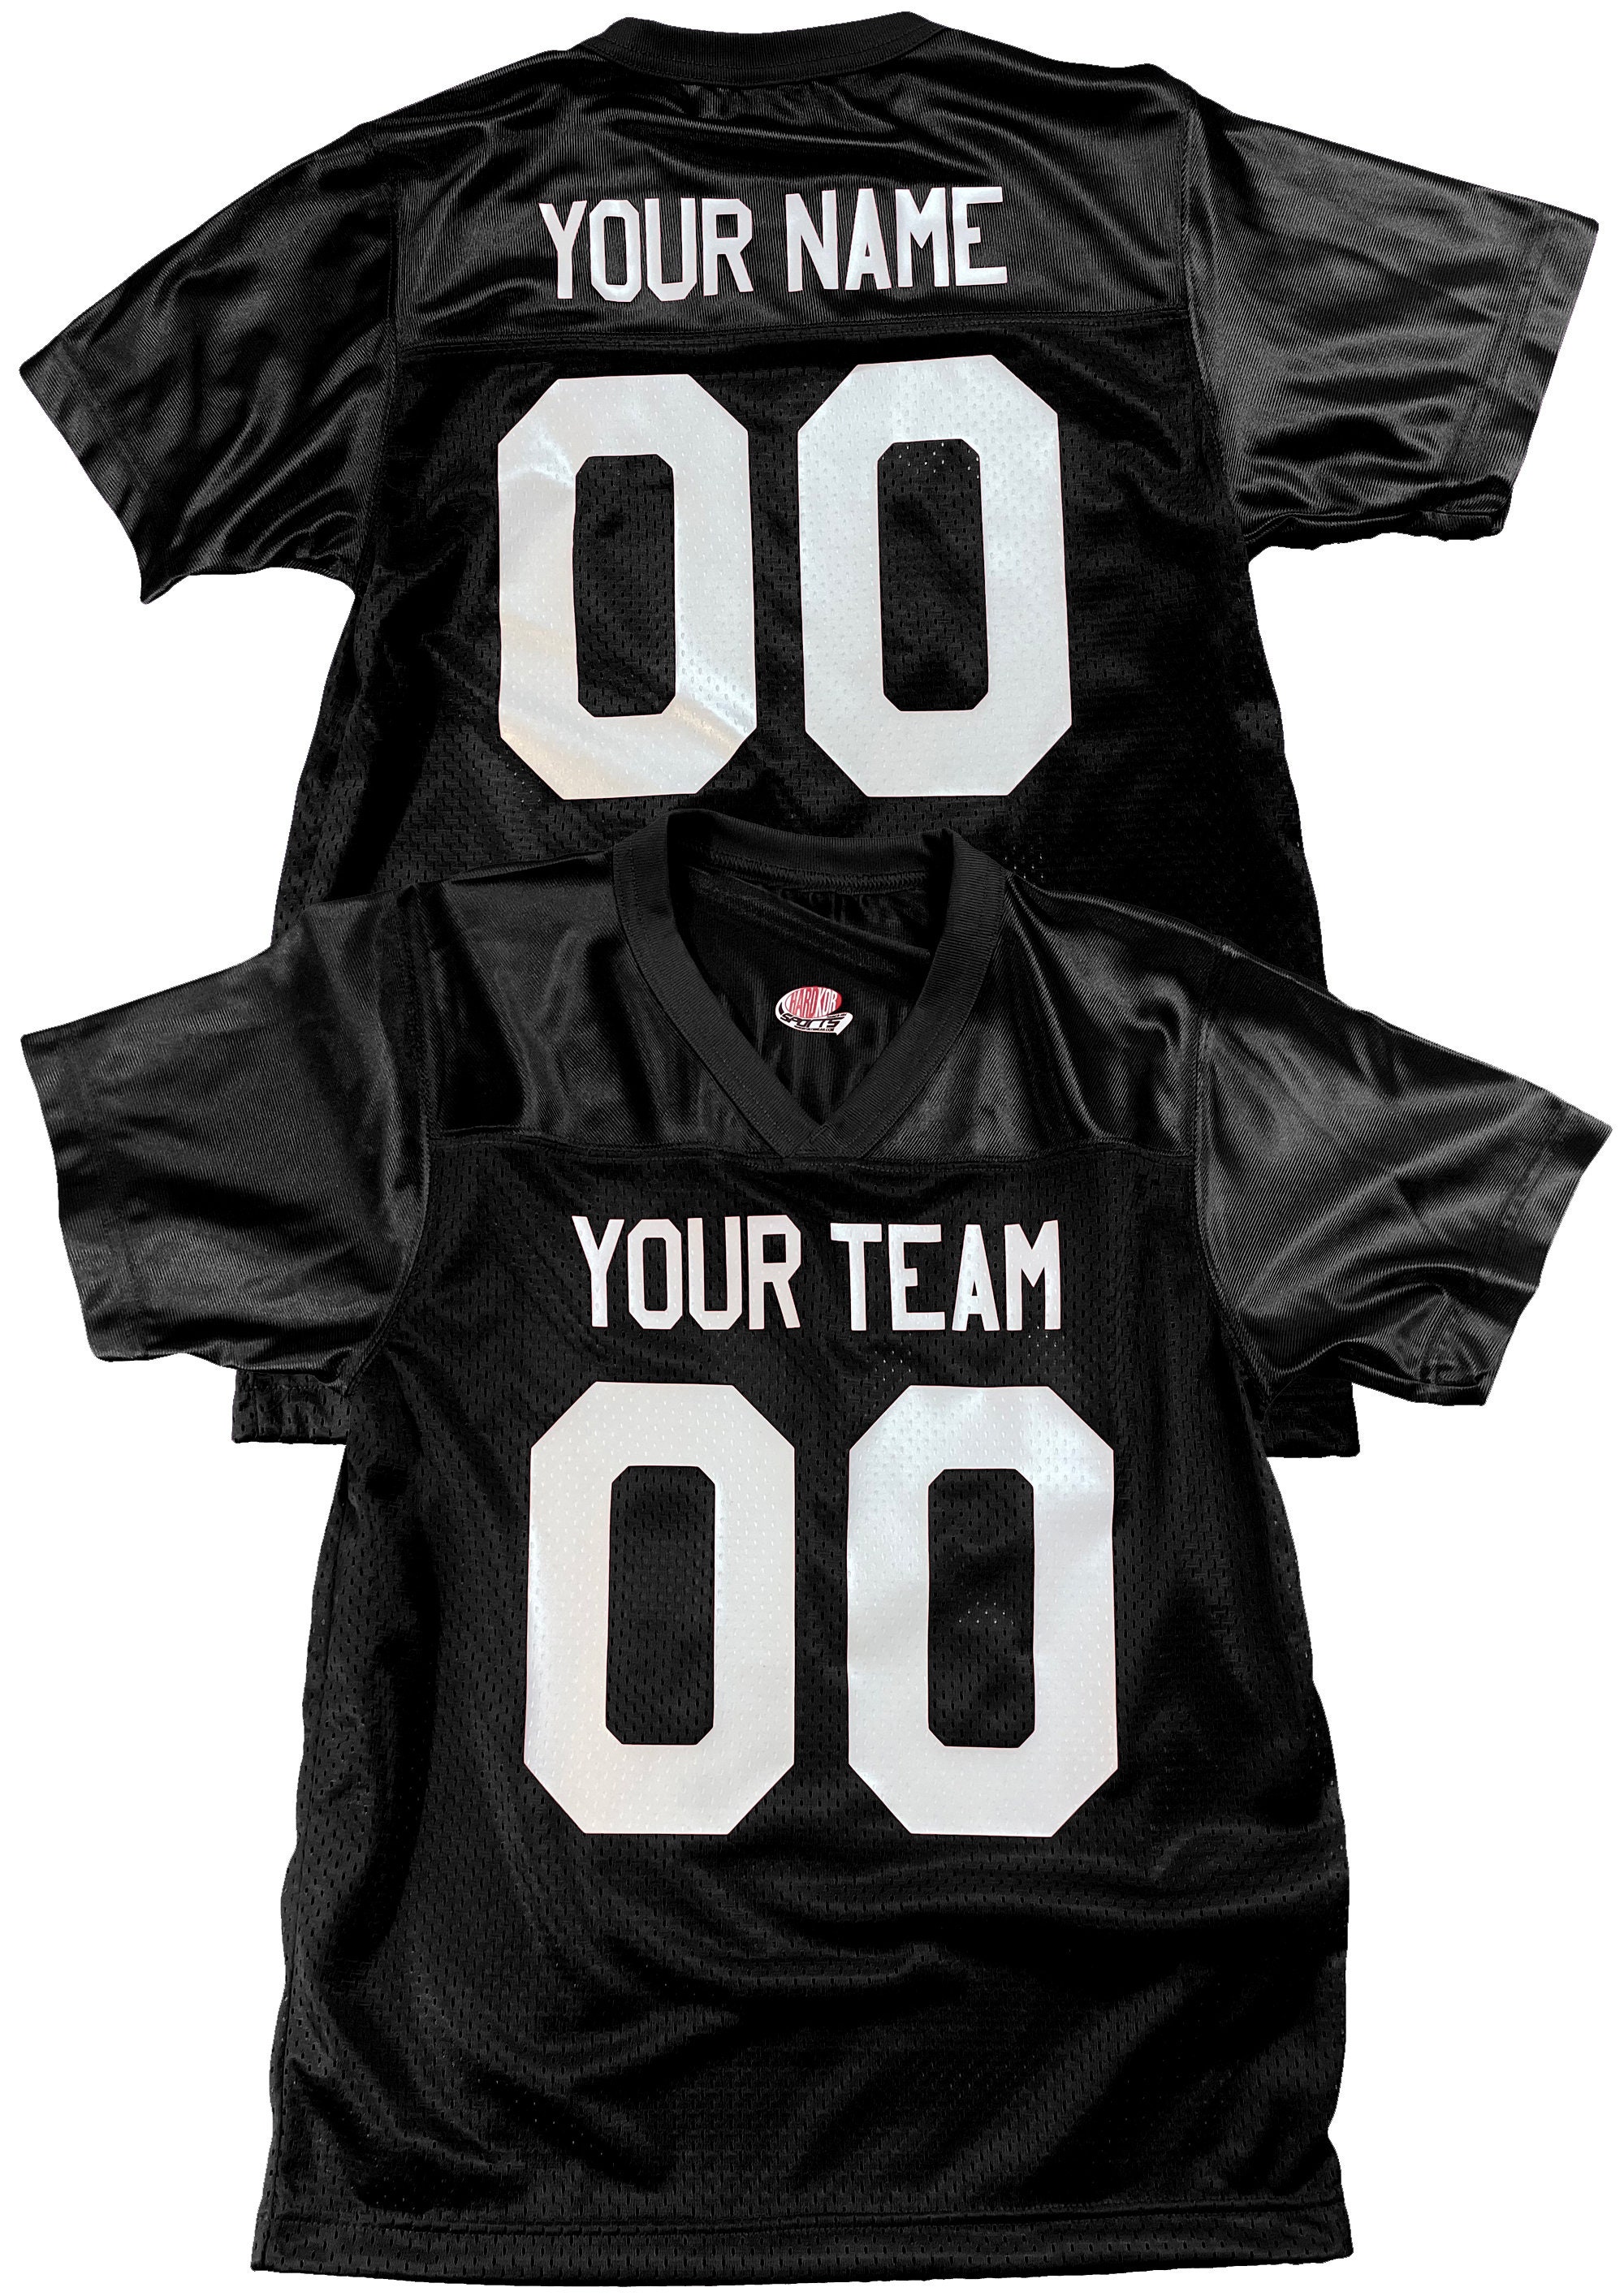  CHAMPRO Boys' Time Out Youth Stretch Football Practice Jersey  : Clothing, Shoes & Jewelry